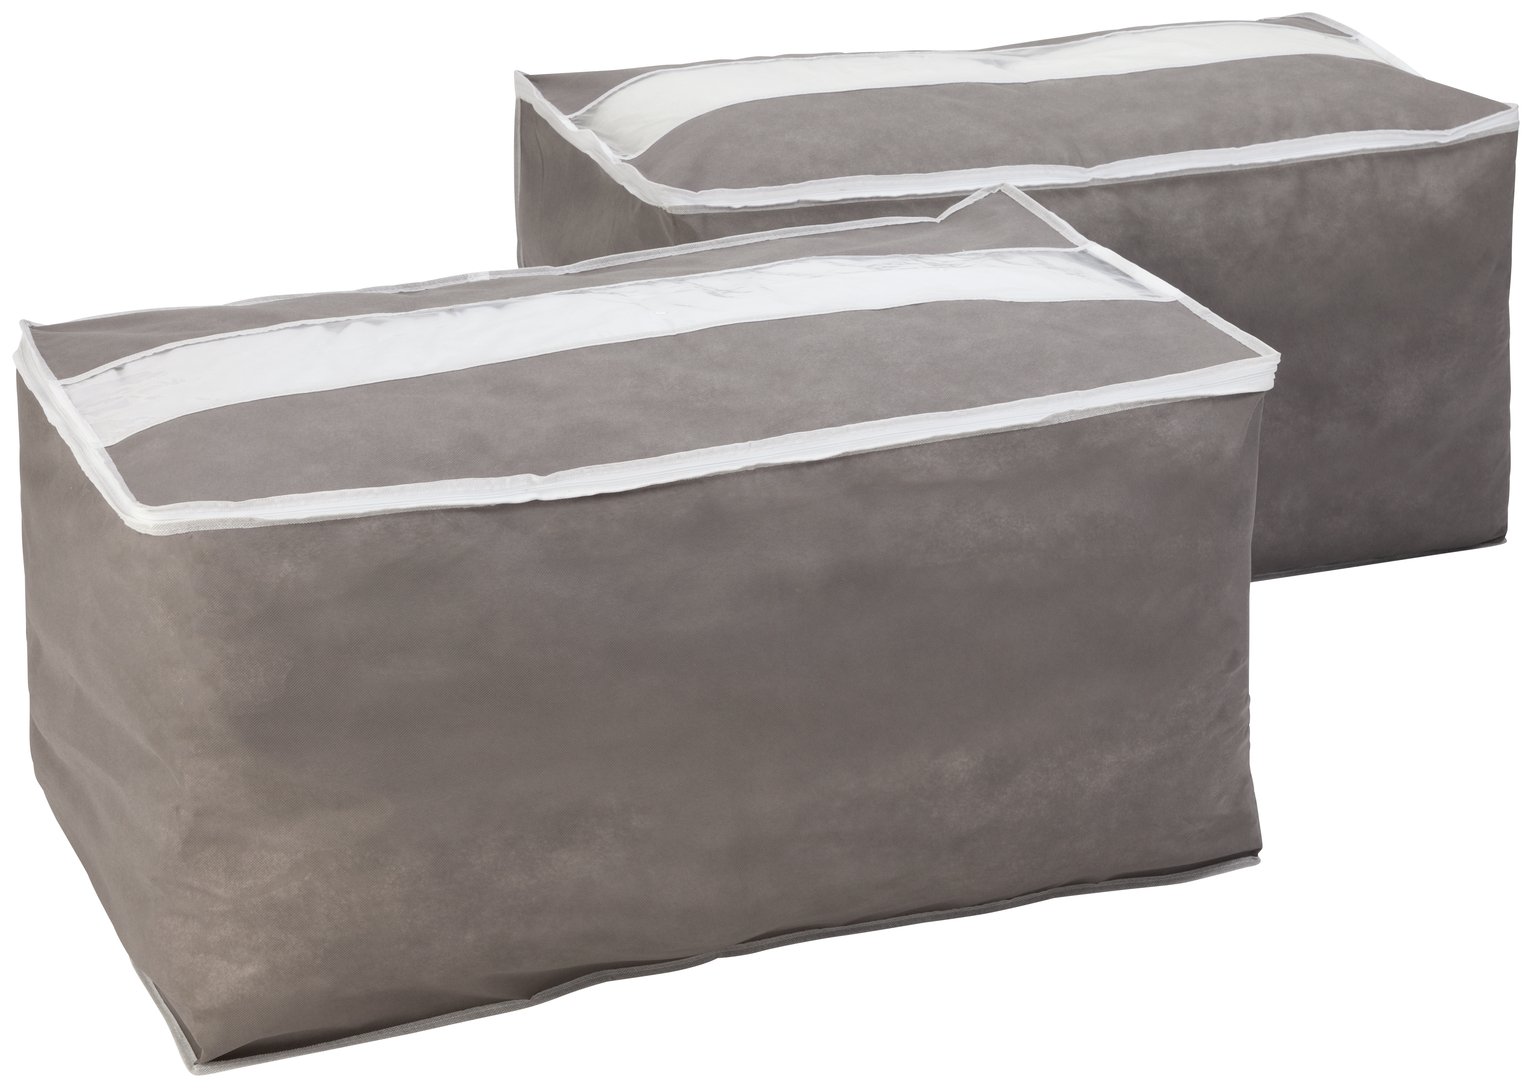 Argos Home Pack of 2 Jumbo Storage Bags - Grey and White